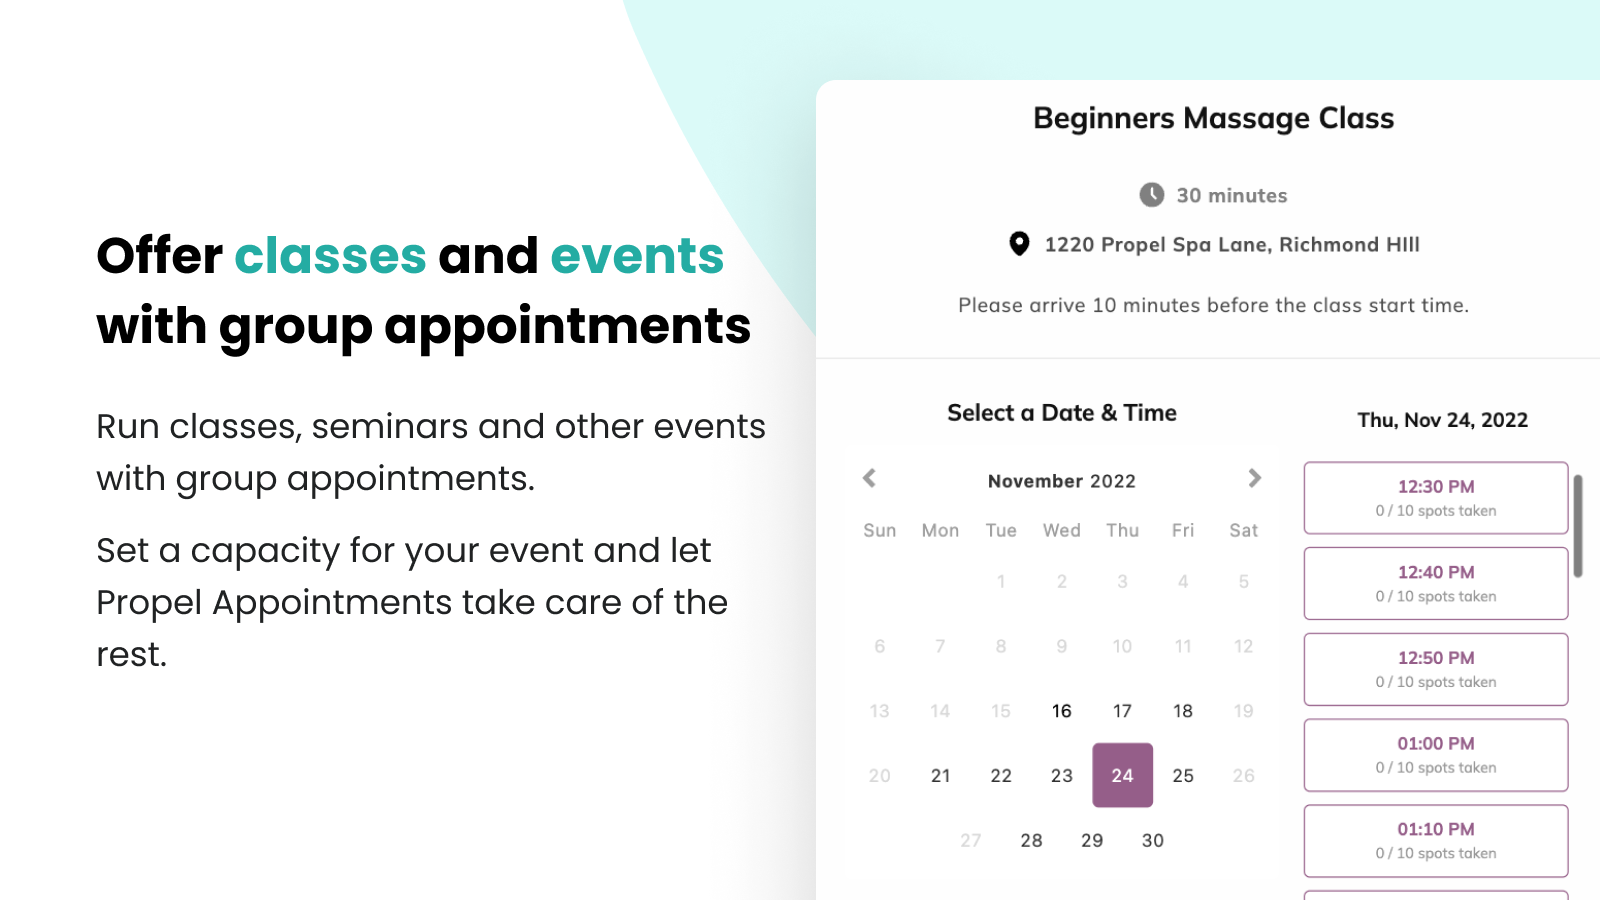 Offer classes and events with group appointments